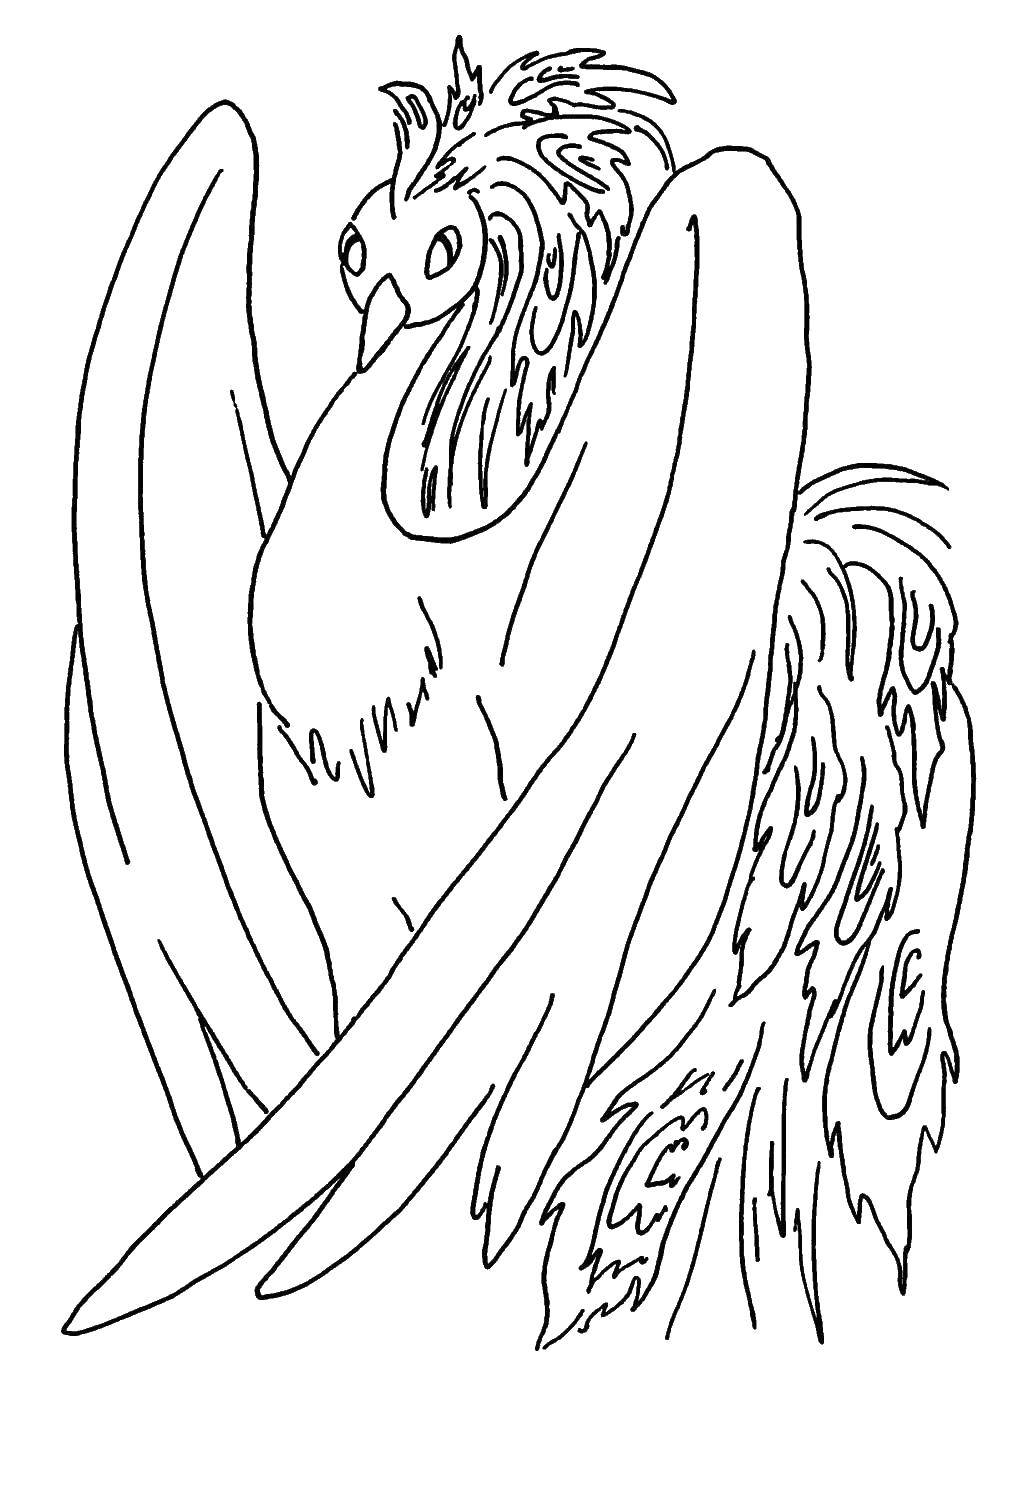 Coloring Firebird. Category The characters from fairy tales. Tags:  Tales, The Firebird.